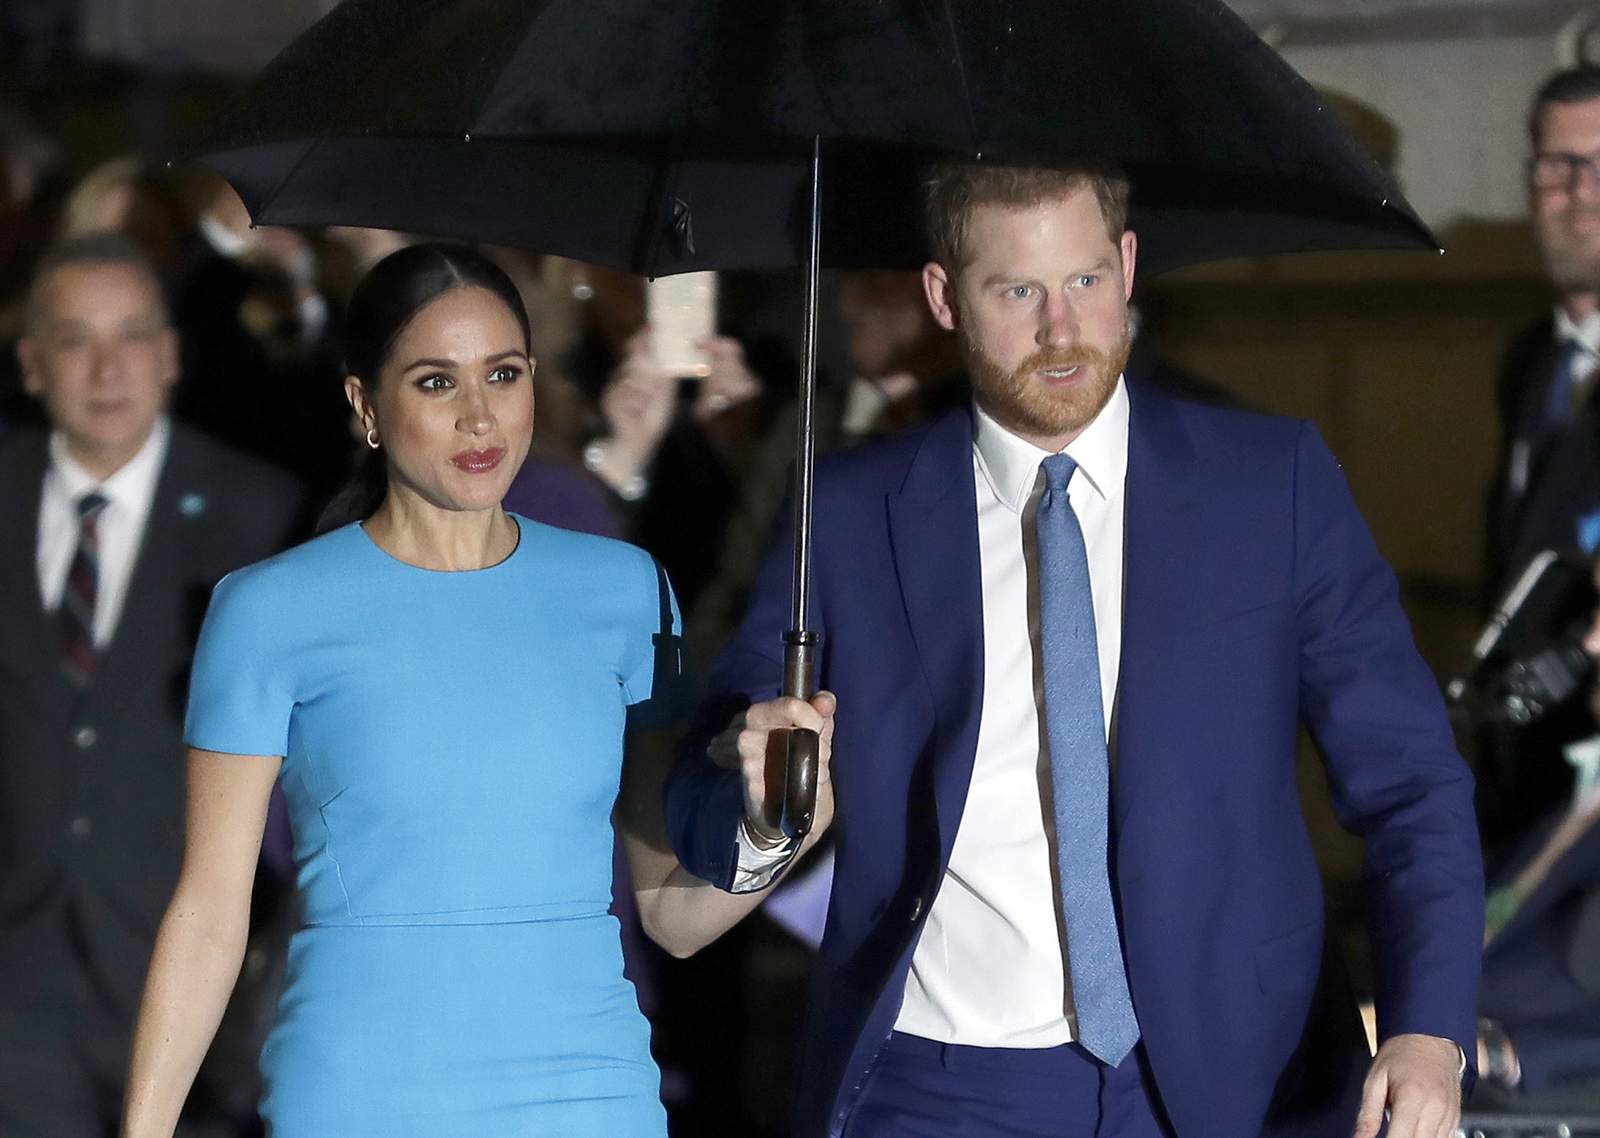 Duchess of Sussex, the former Meghan Markle, reveals she had miscarriage